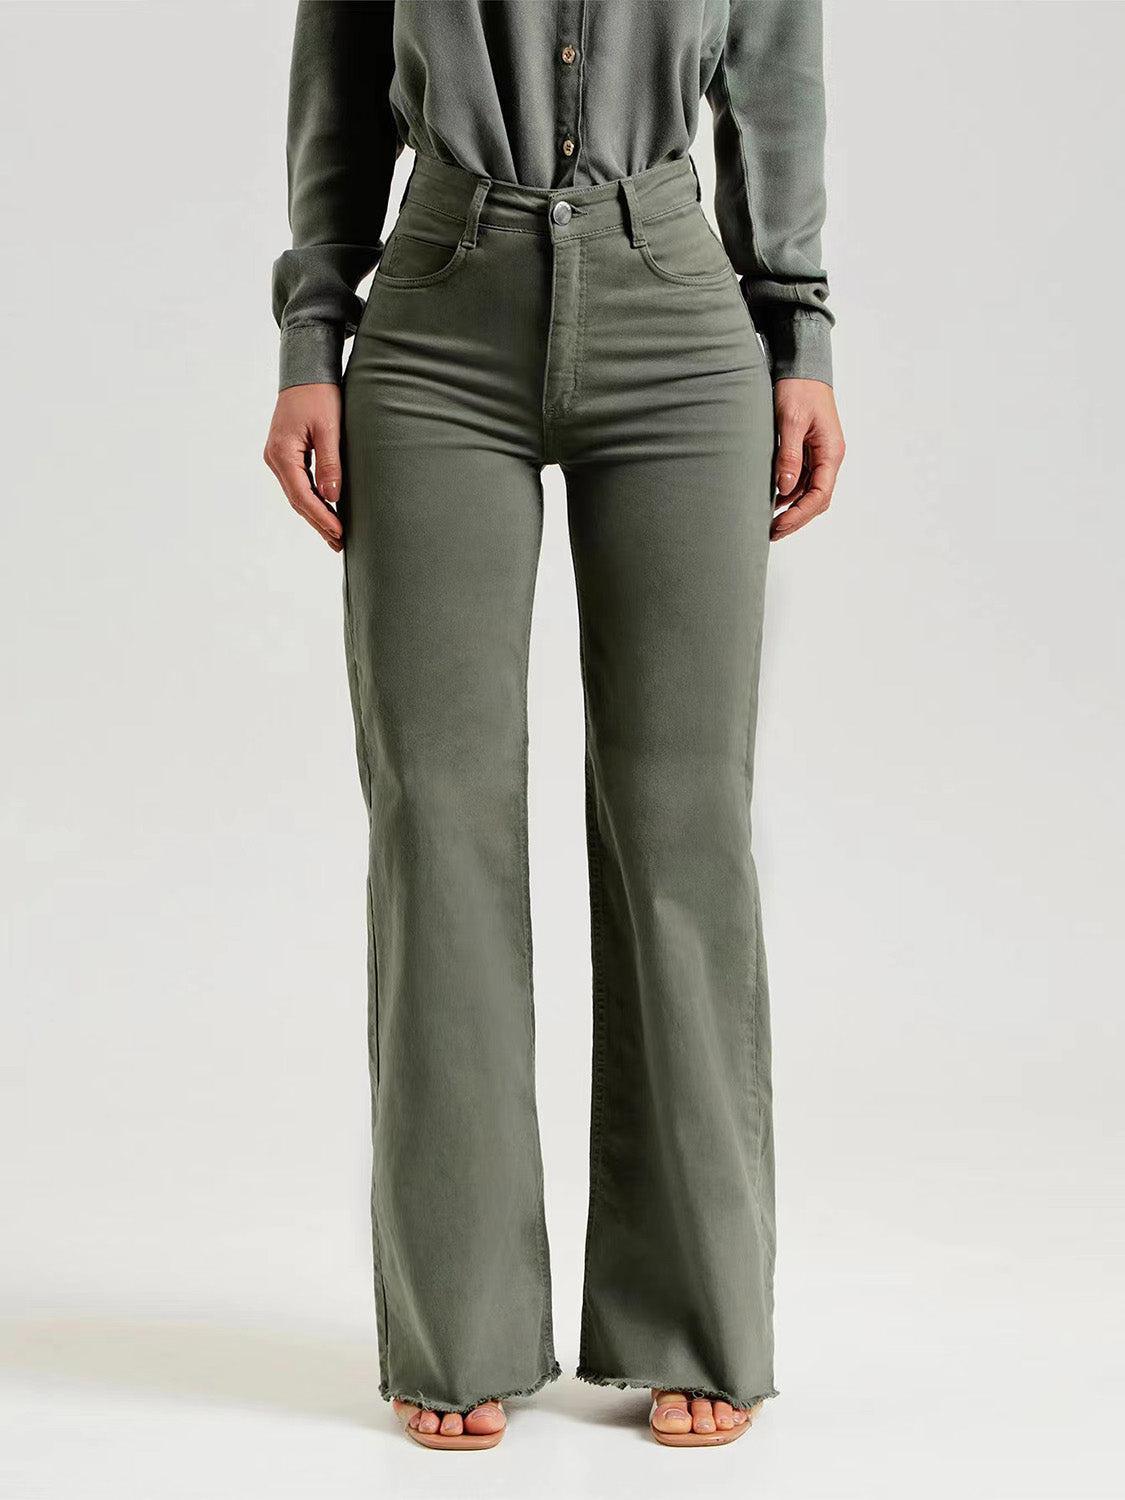 a woman in a gray shirt and green pants